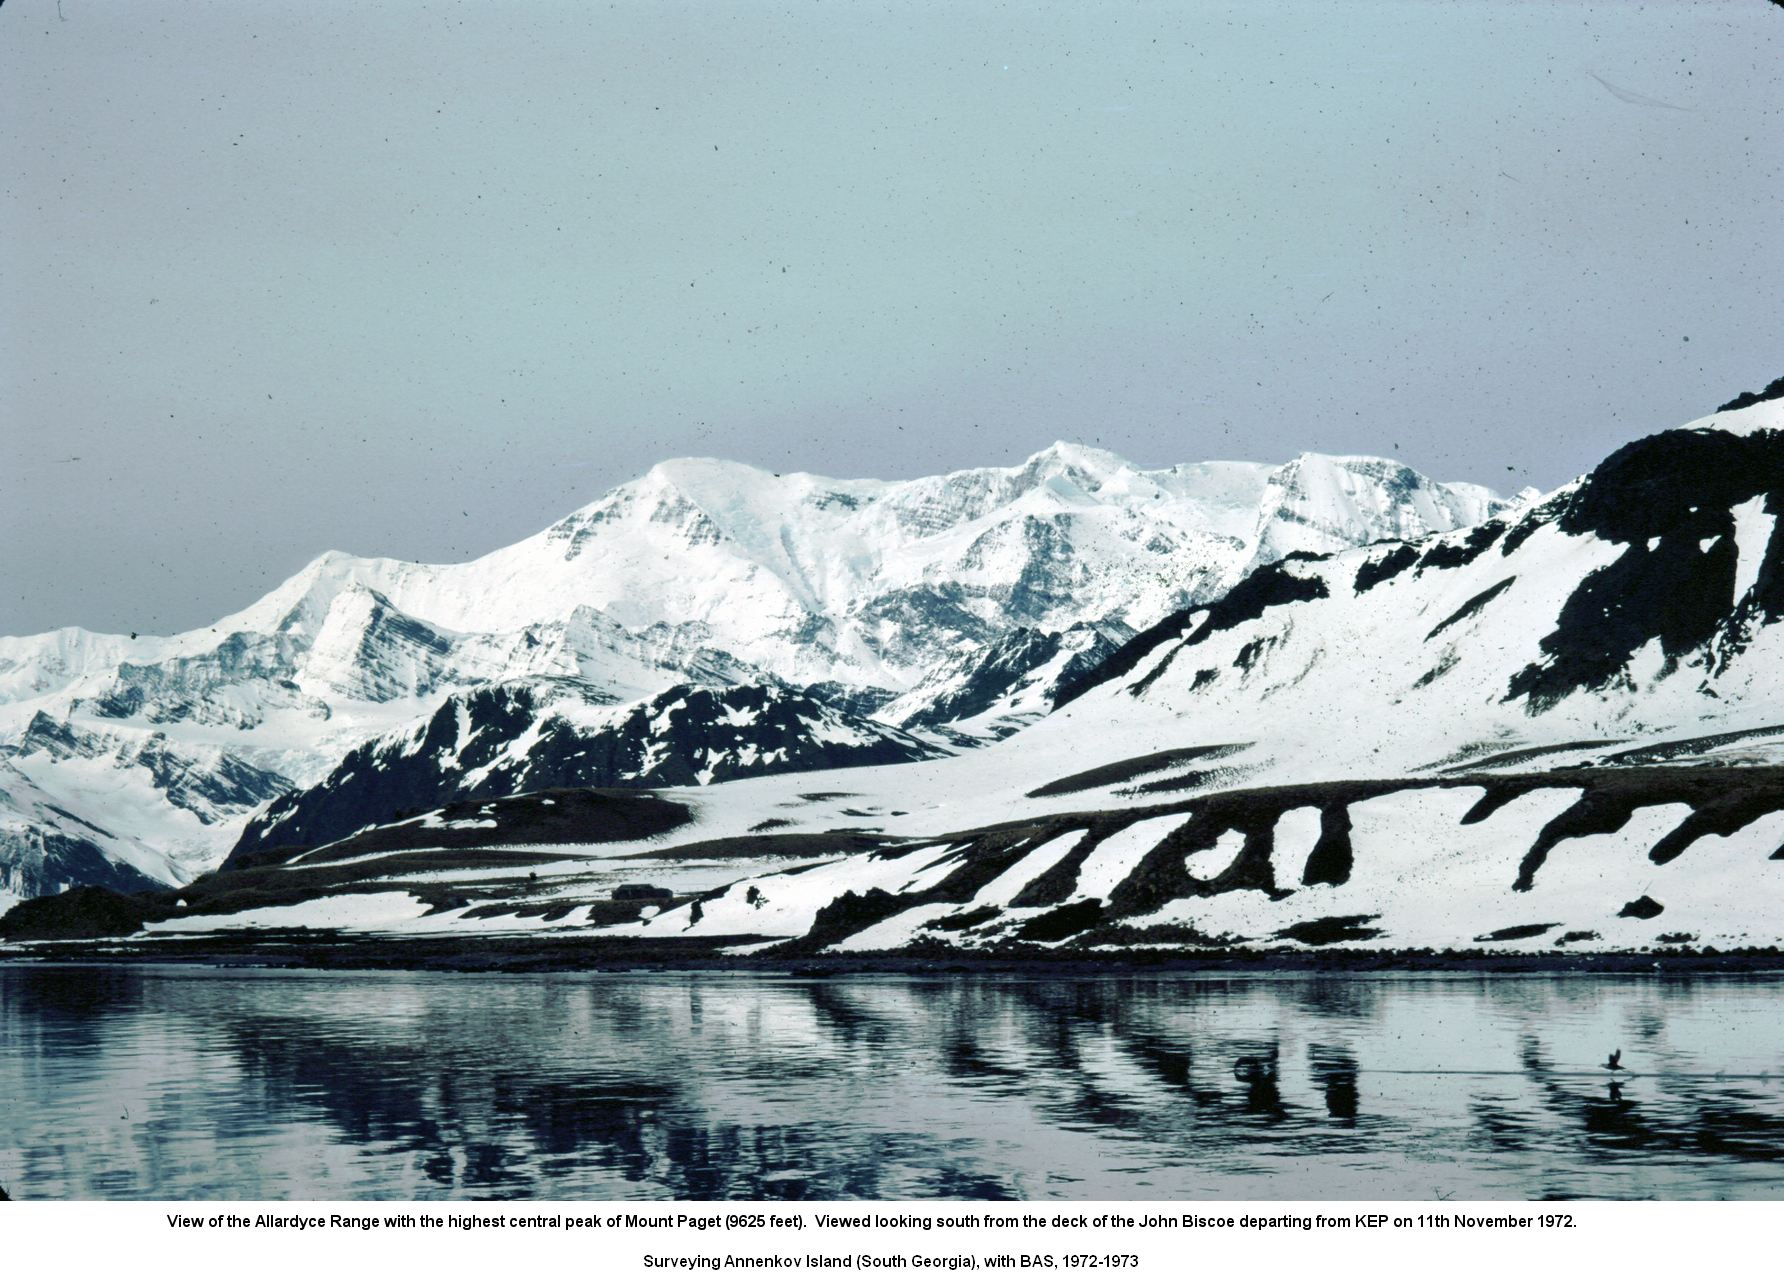 View of the Allardyce Range, South Georgia, viewed looking south from the deck of the John Biscoe on the 11th November 1972.